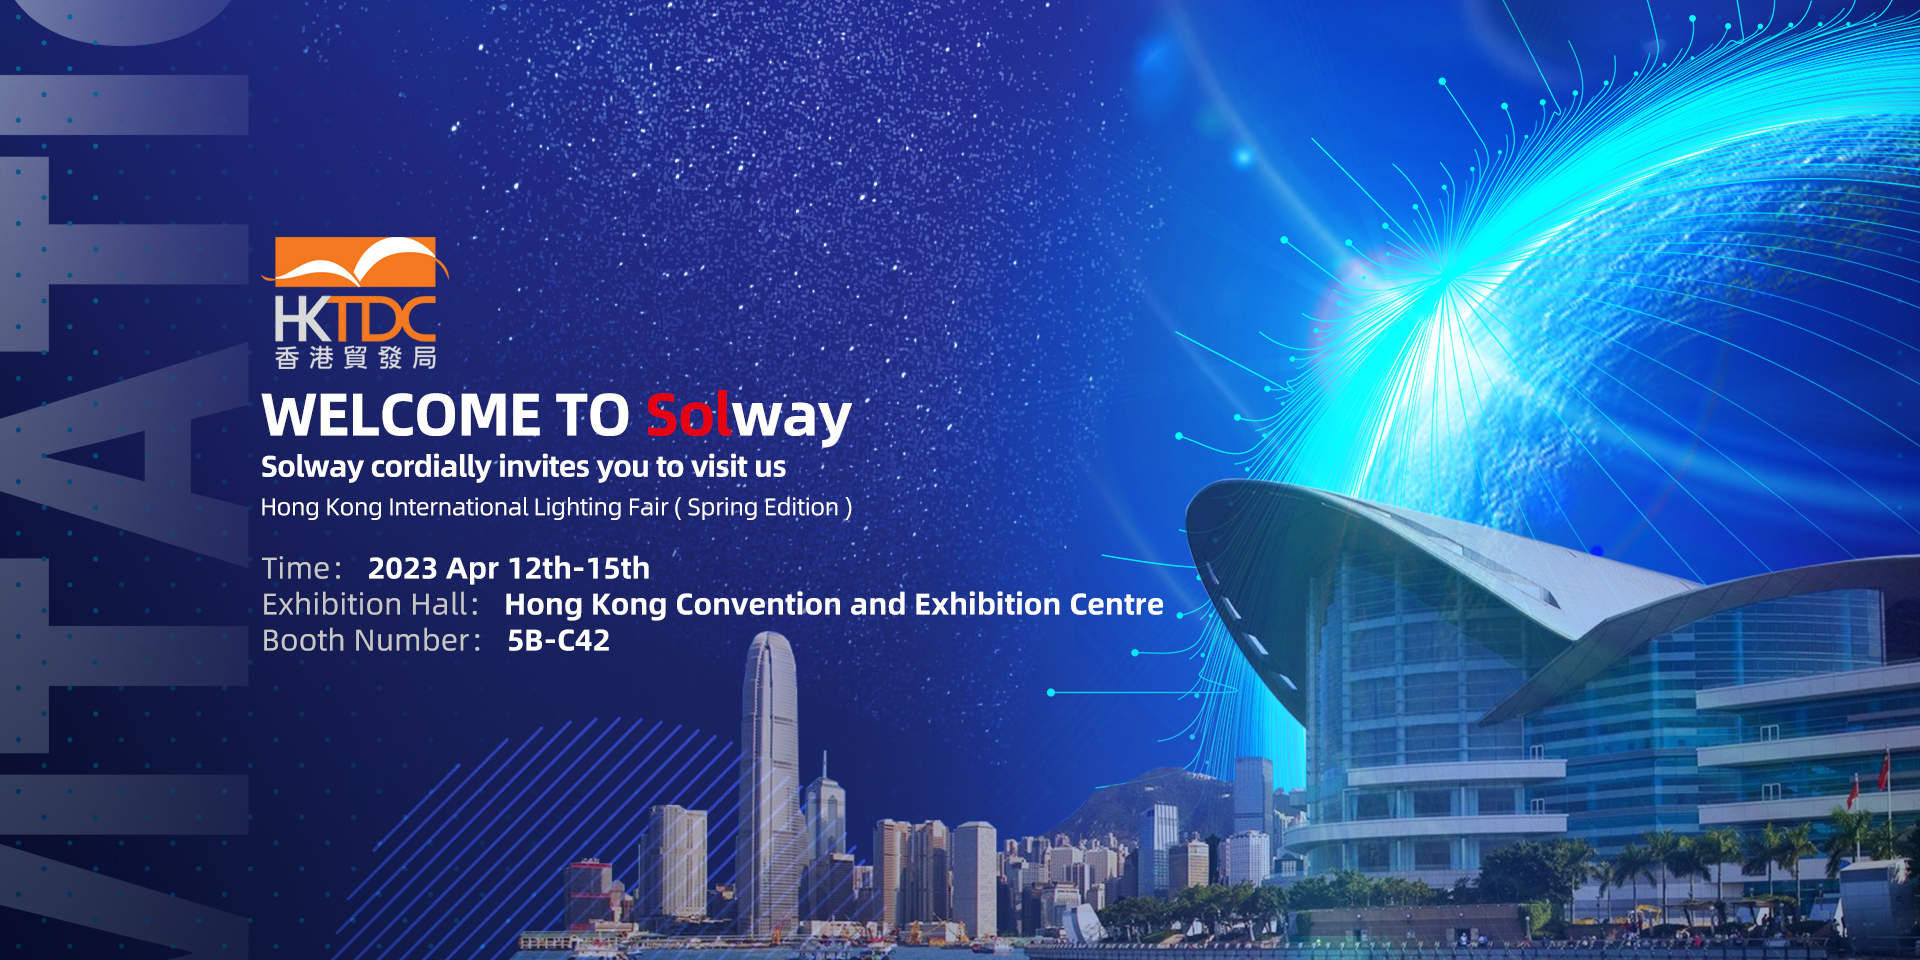 Solway will attend the HKTDC Hong Kong Internationl Lighting Fair (Spring Edition) as a exhibitor